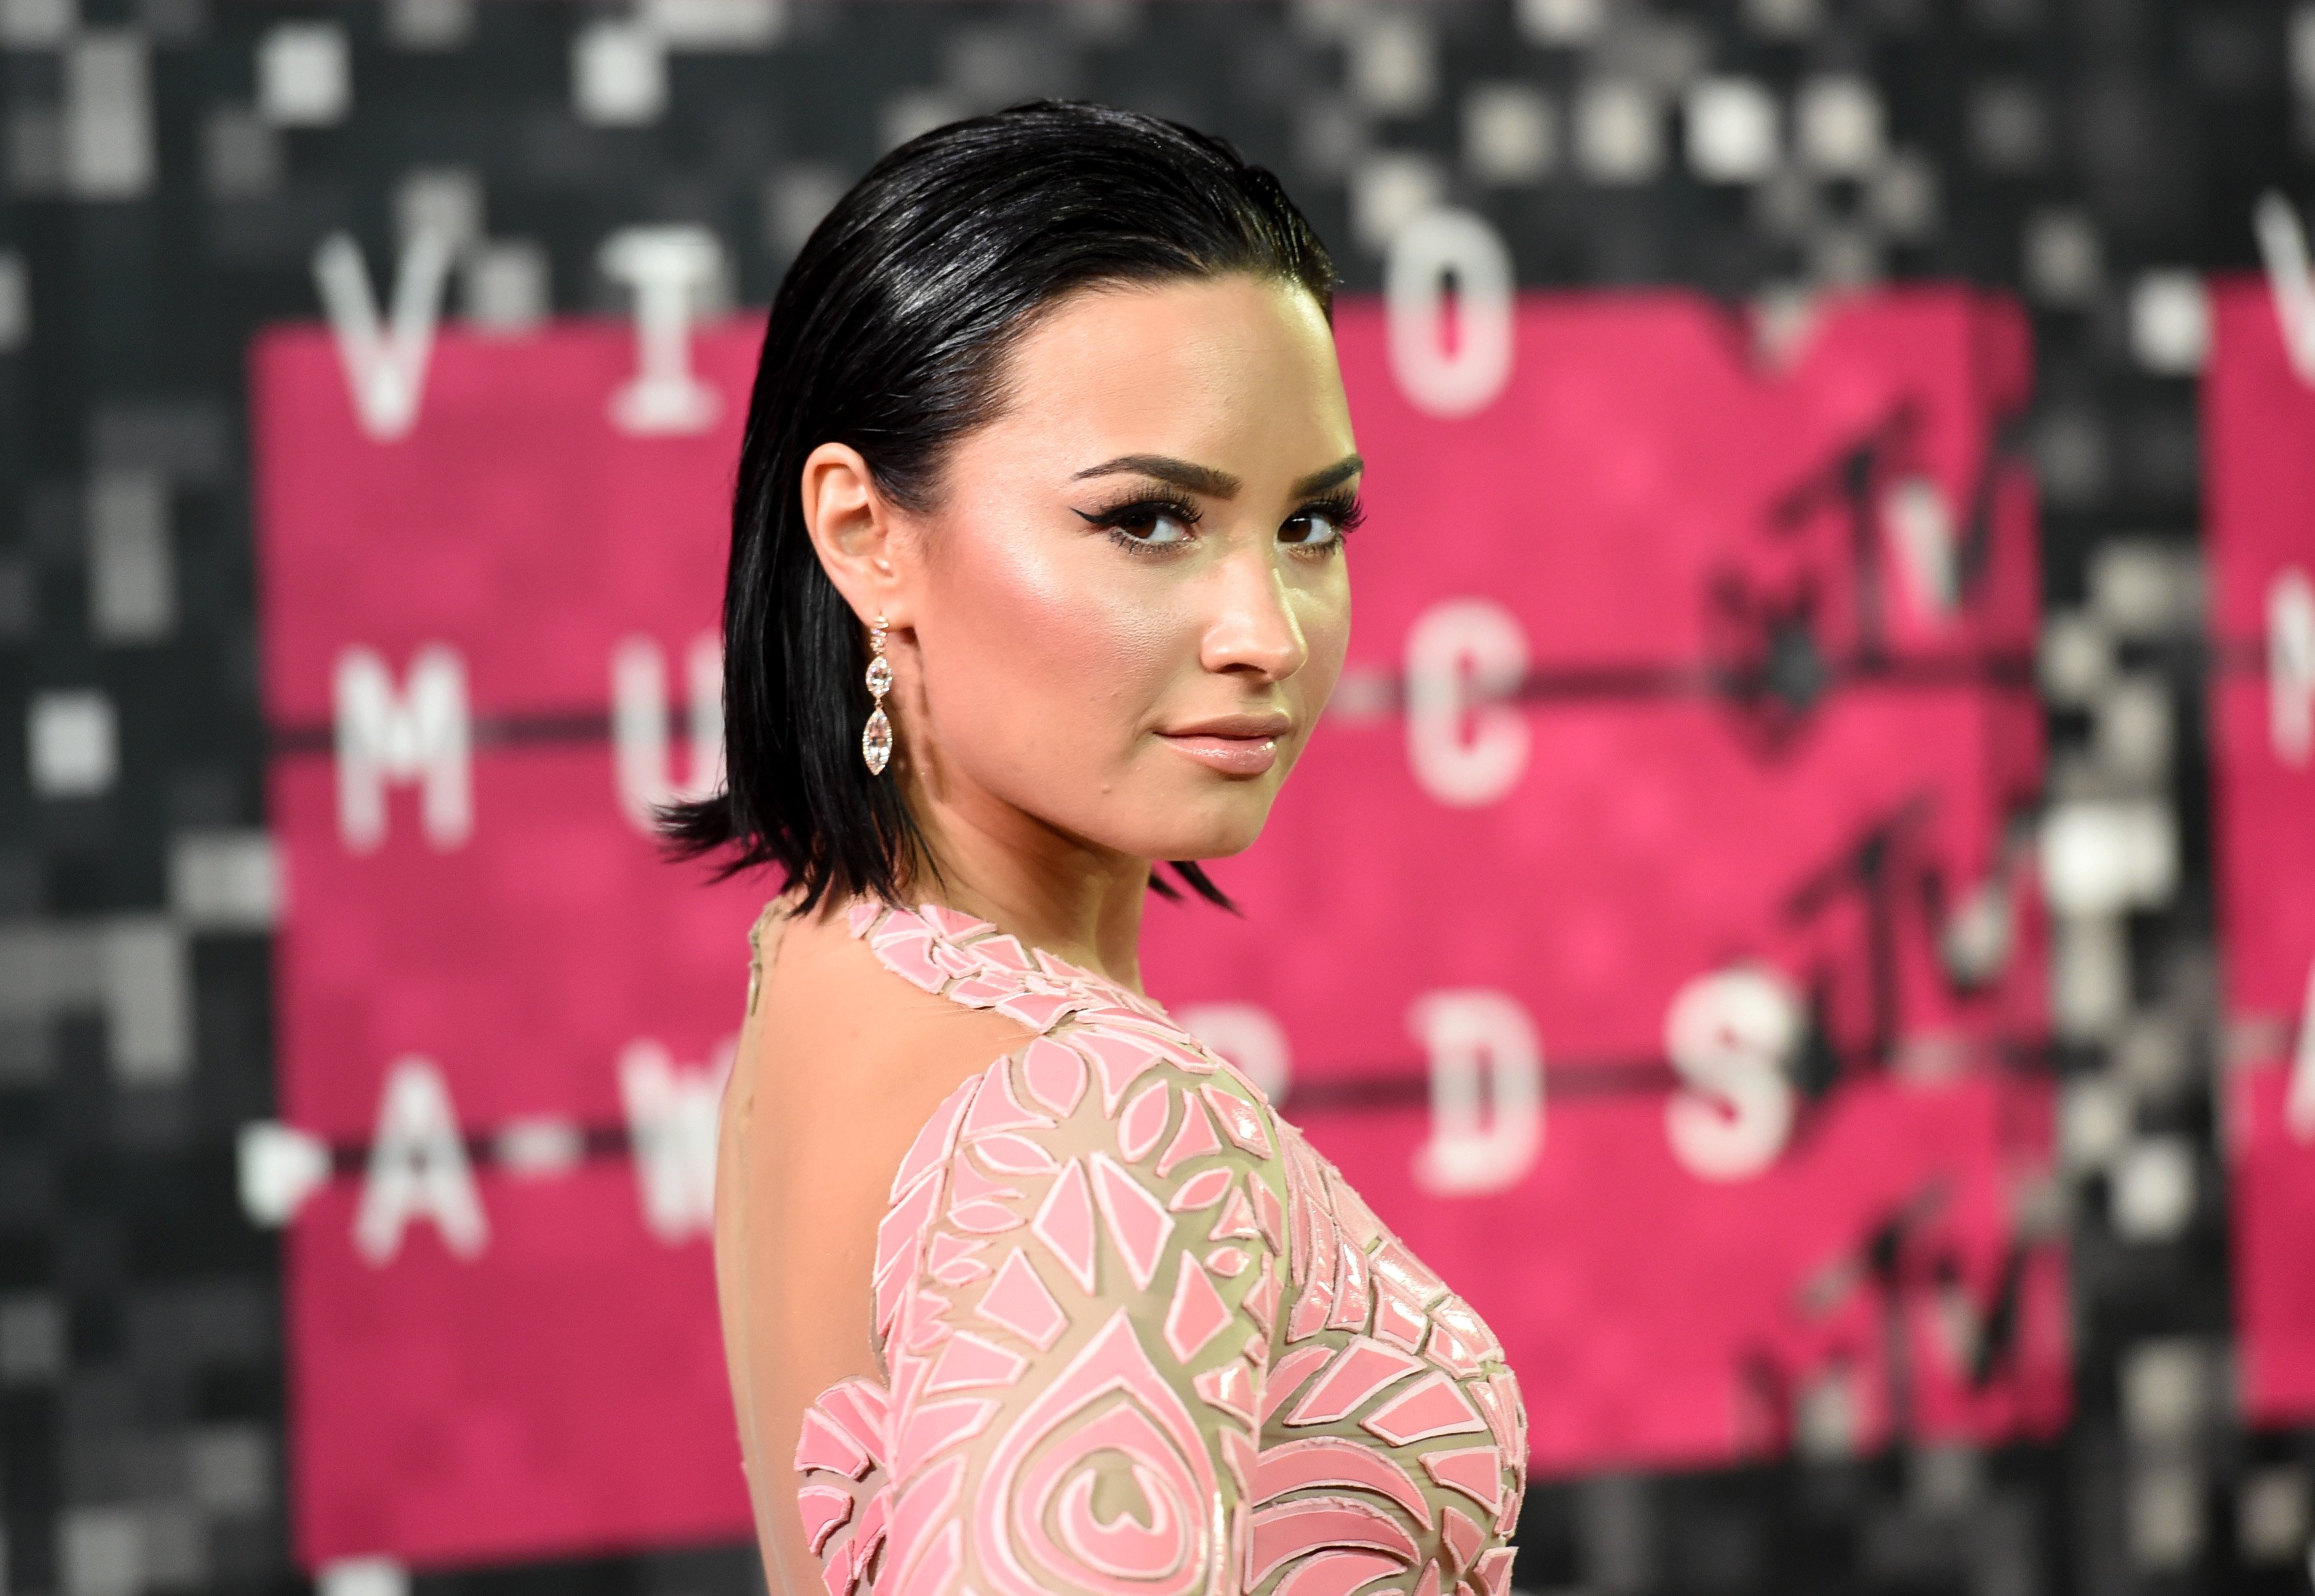 Demi Lovato attends the 2015 MTV Video Music Awards at Microsoft Theater on August 30, 2015 in Los Angeles, California | Photo: Getty Images